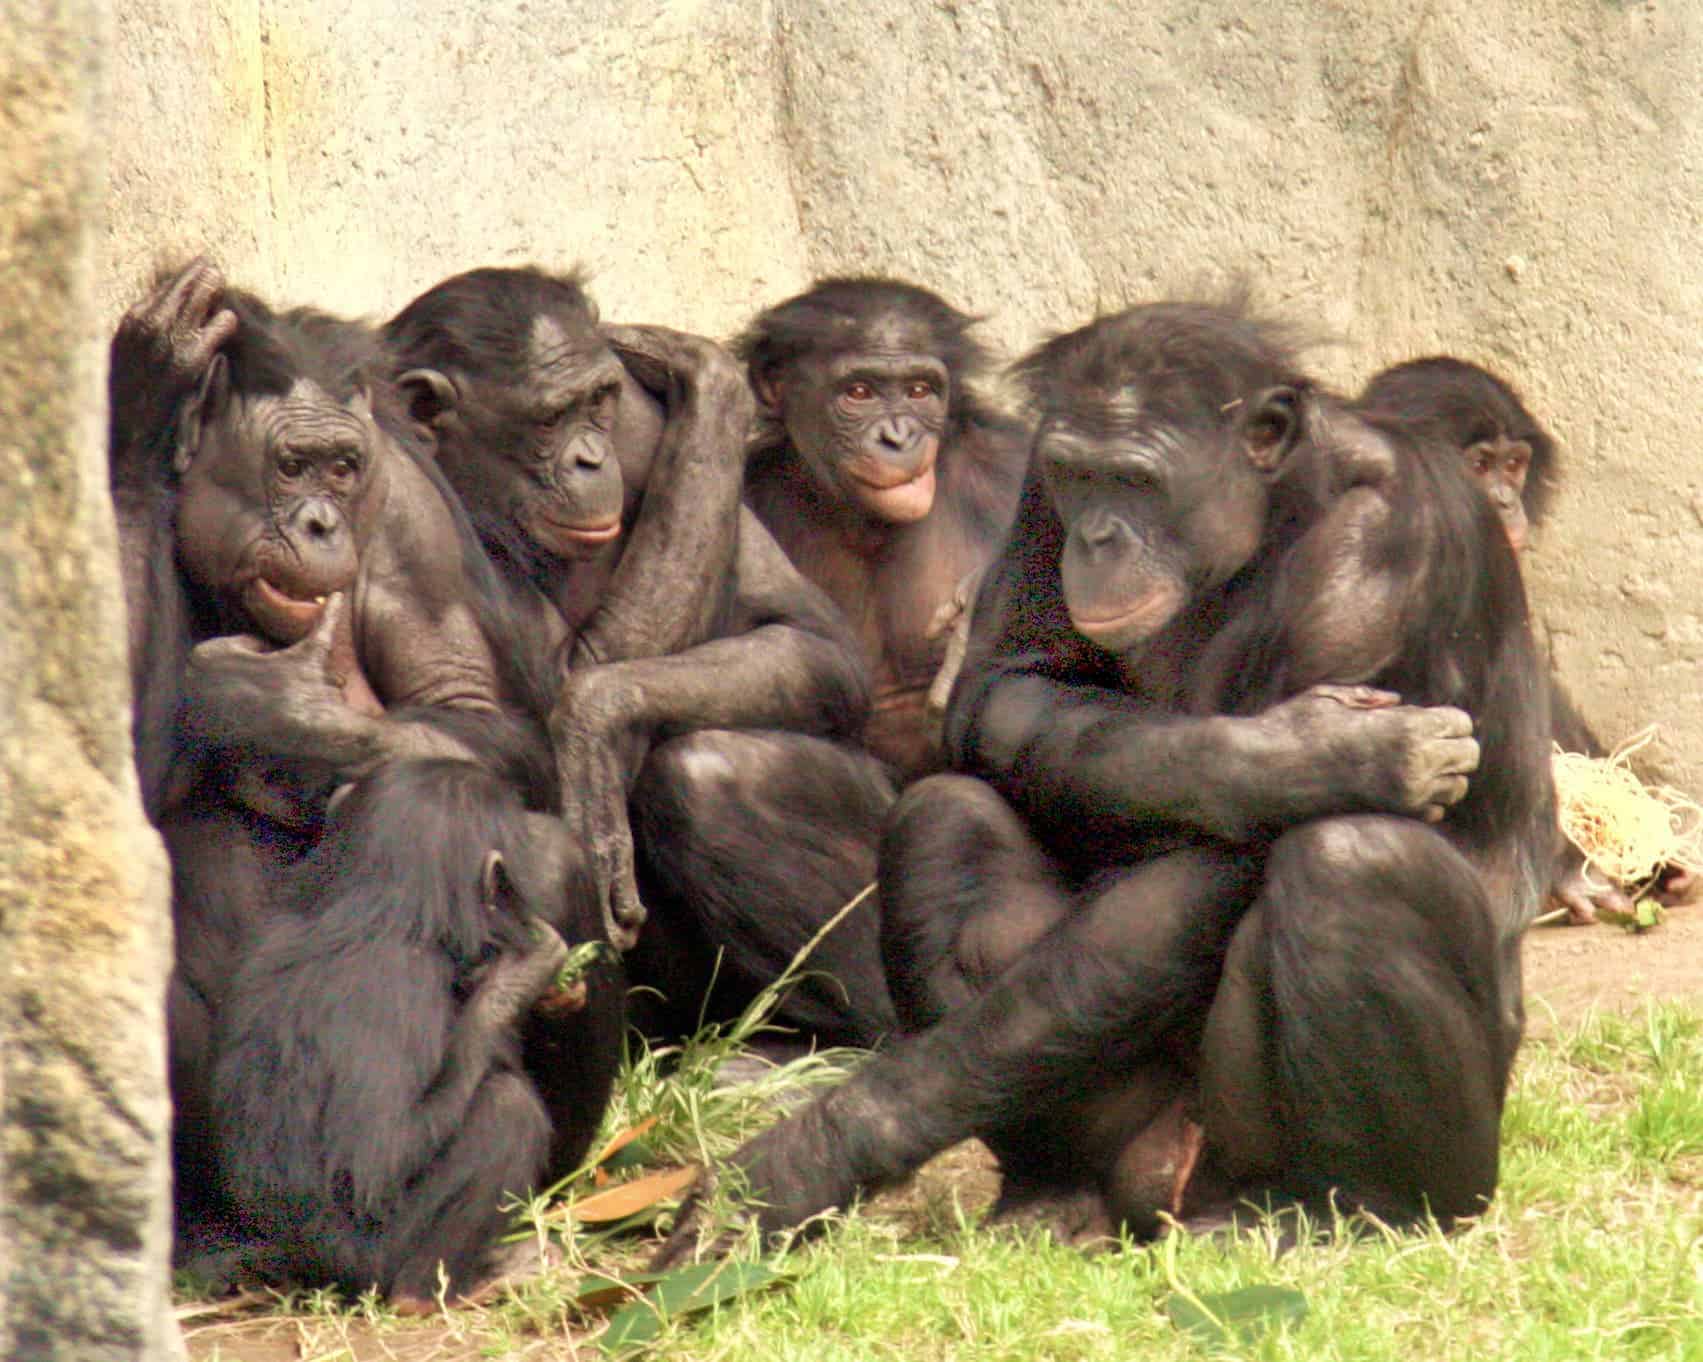 Violence can emerge even in peaceful bonobo communities. Image credits: San Diego Zoo.